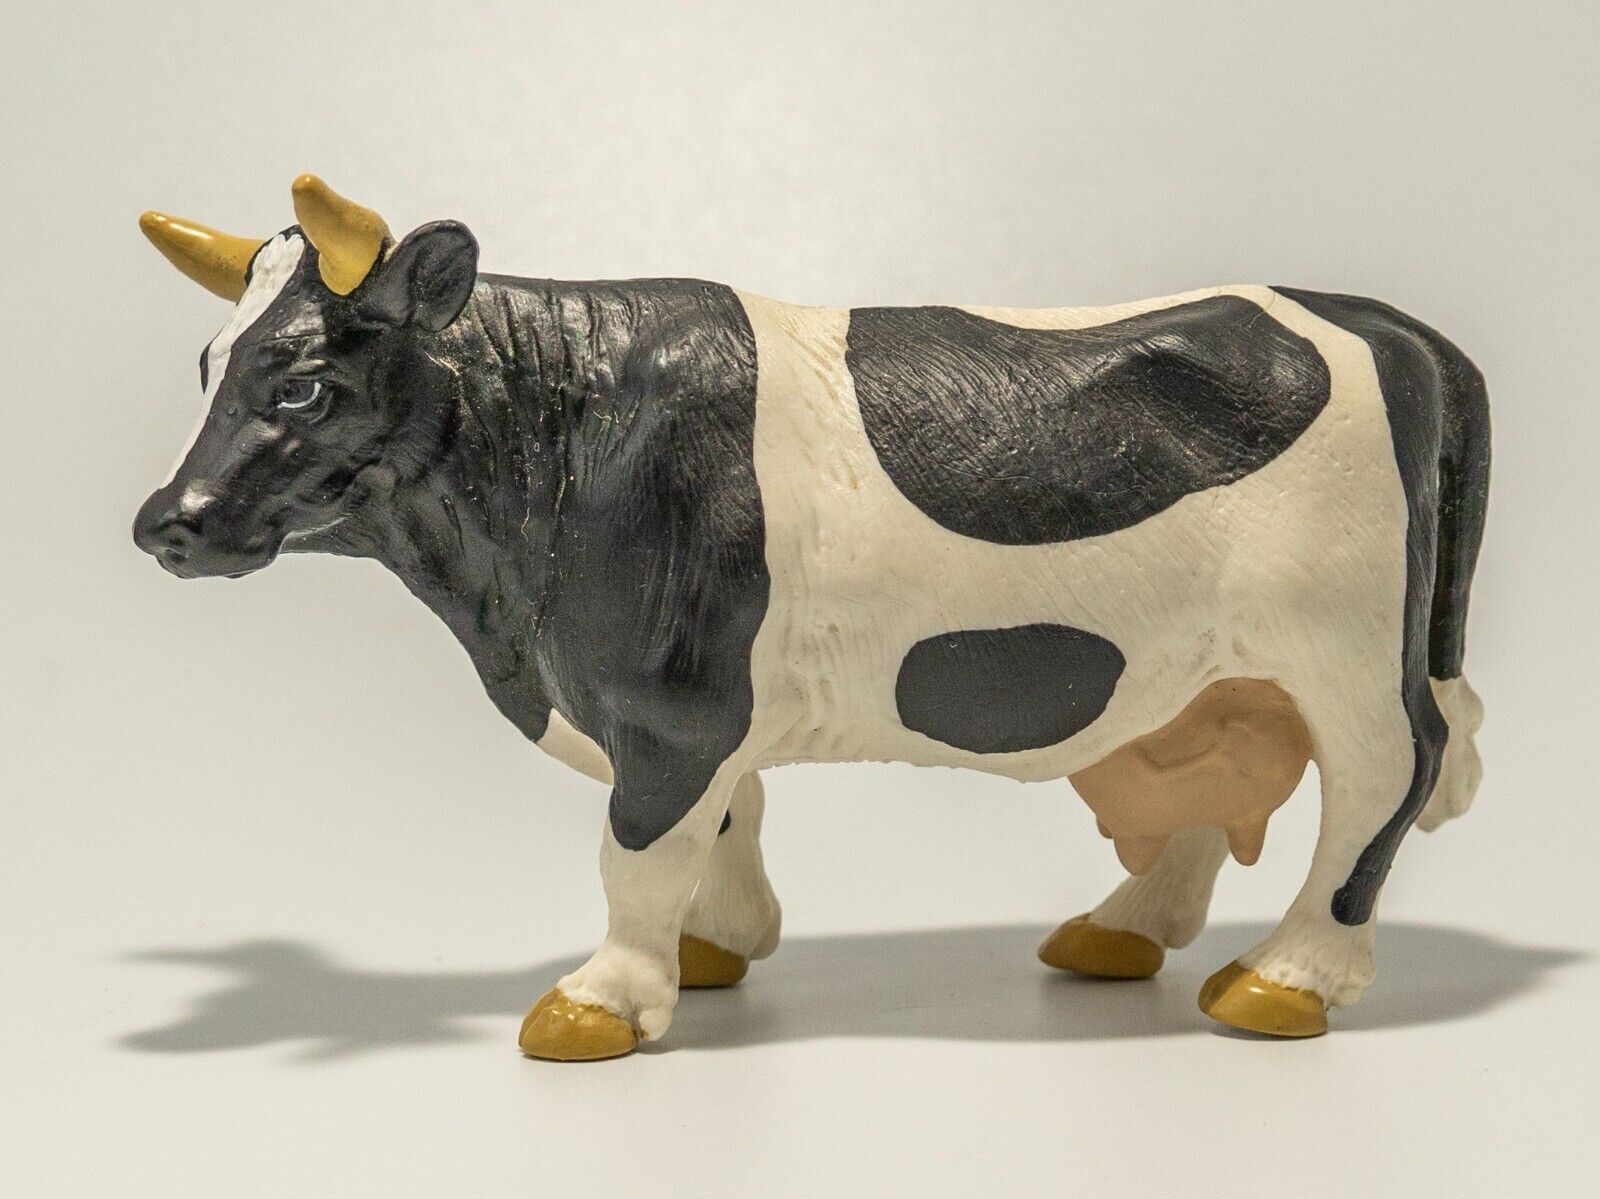 Schleich Dairy Cow Figure Black and White 1990 Retired - Germany